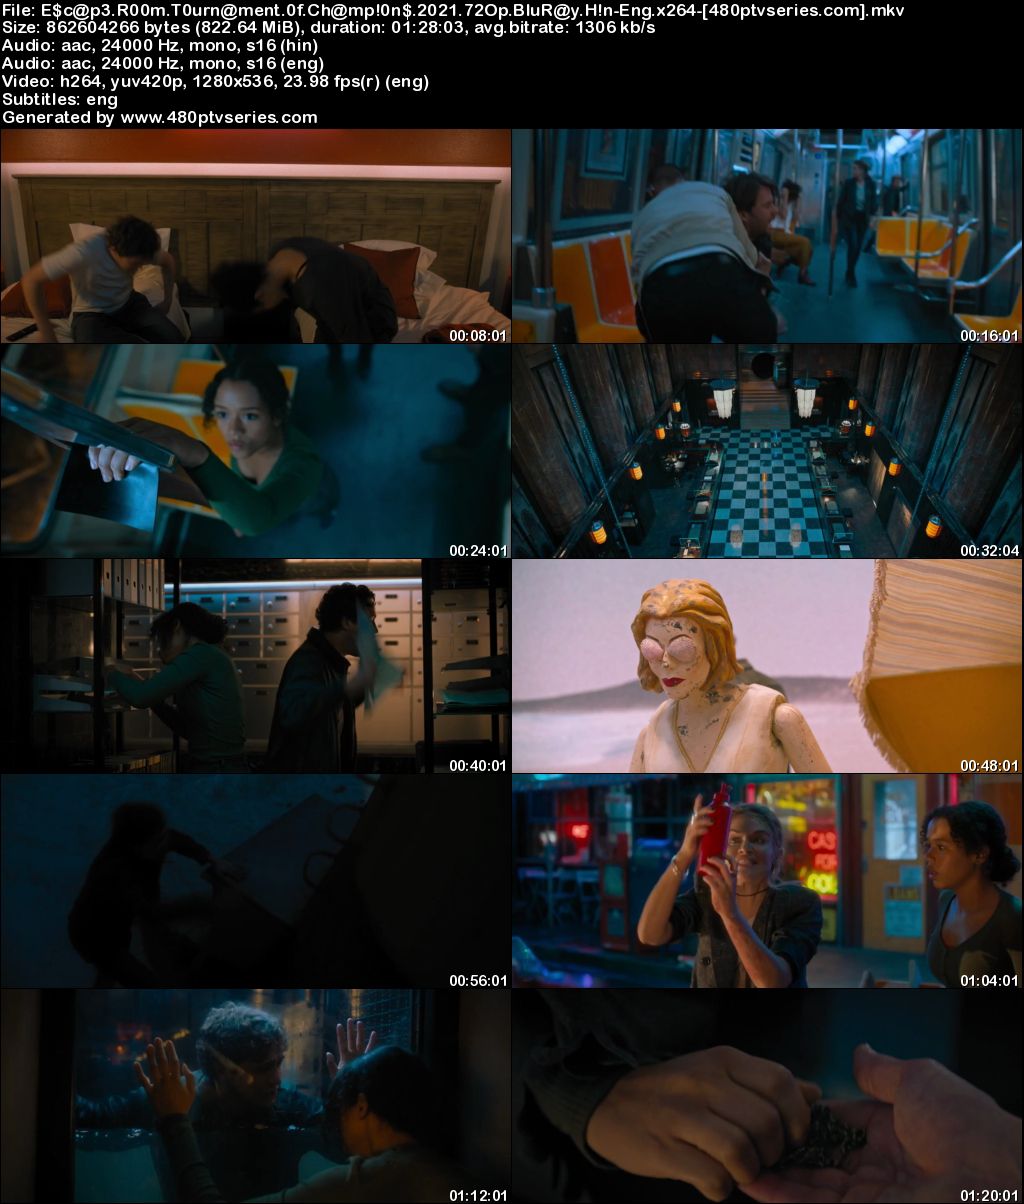 Watch Online Free Escape Room 2: Tournament of Champions (2021) Full Hindi Dual Audio Movie Download 480p 720p BluRay